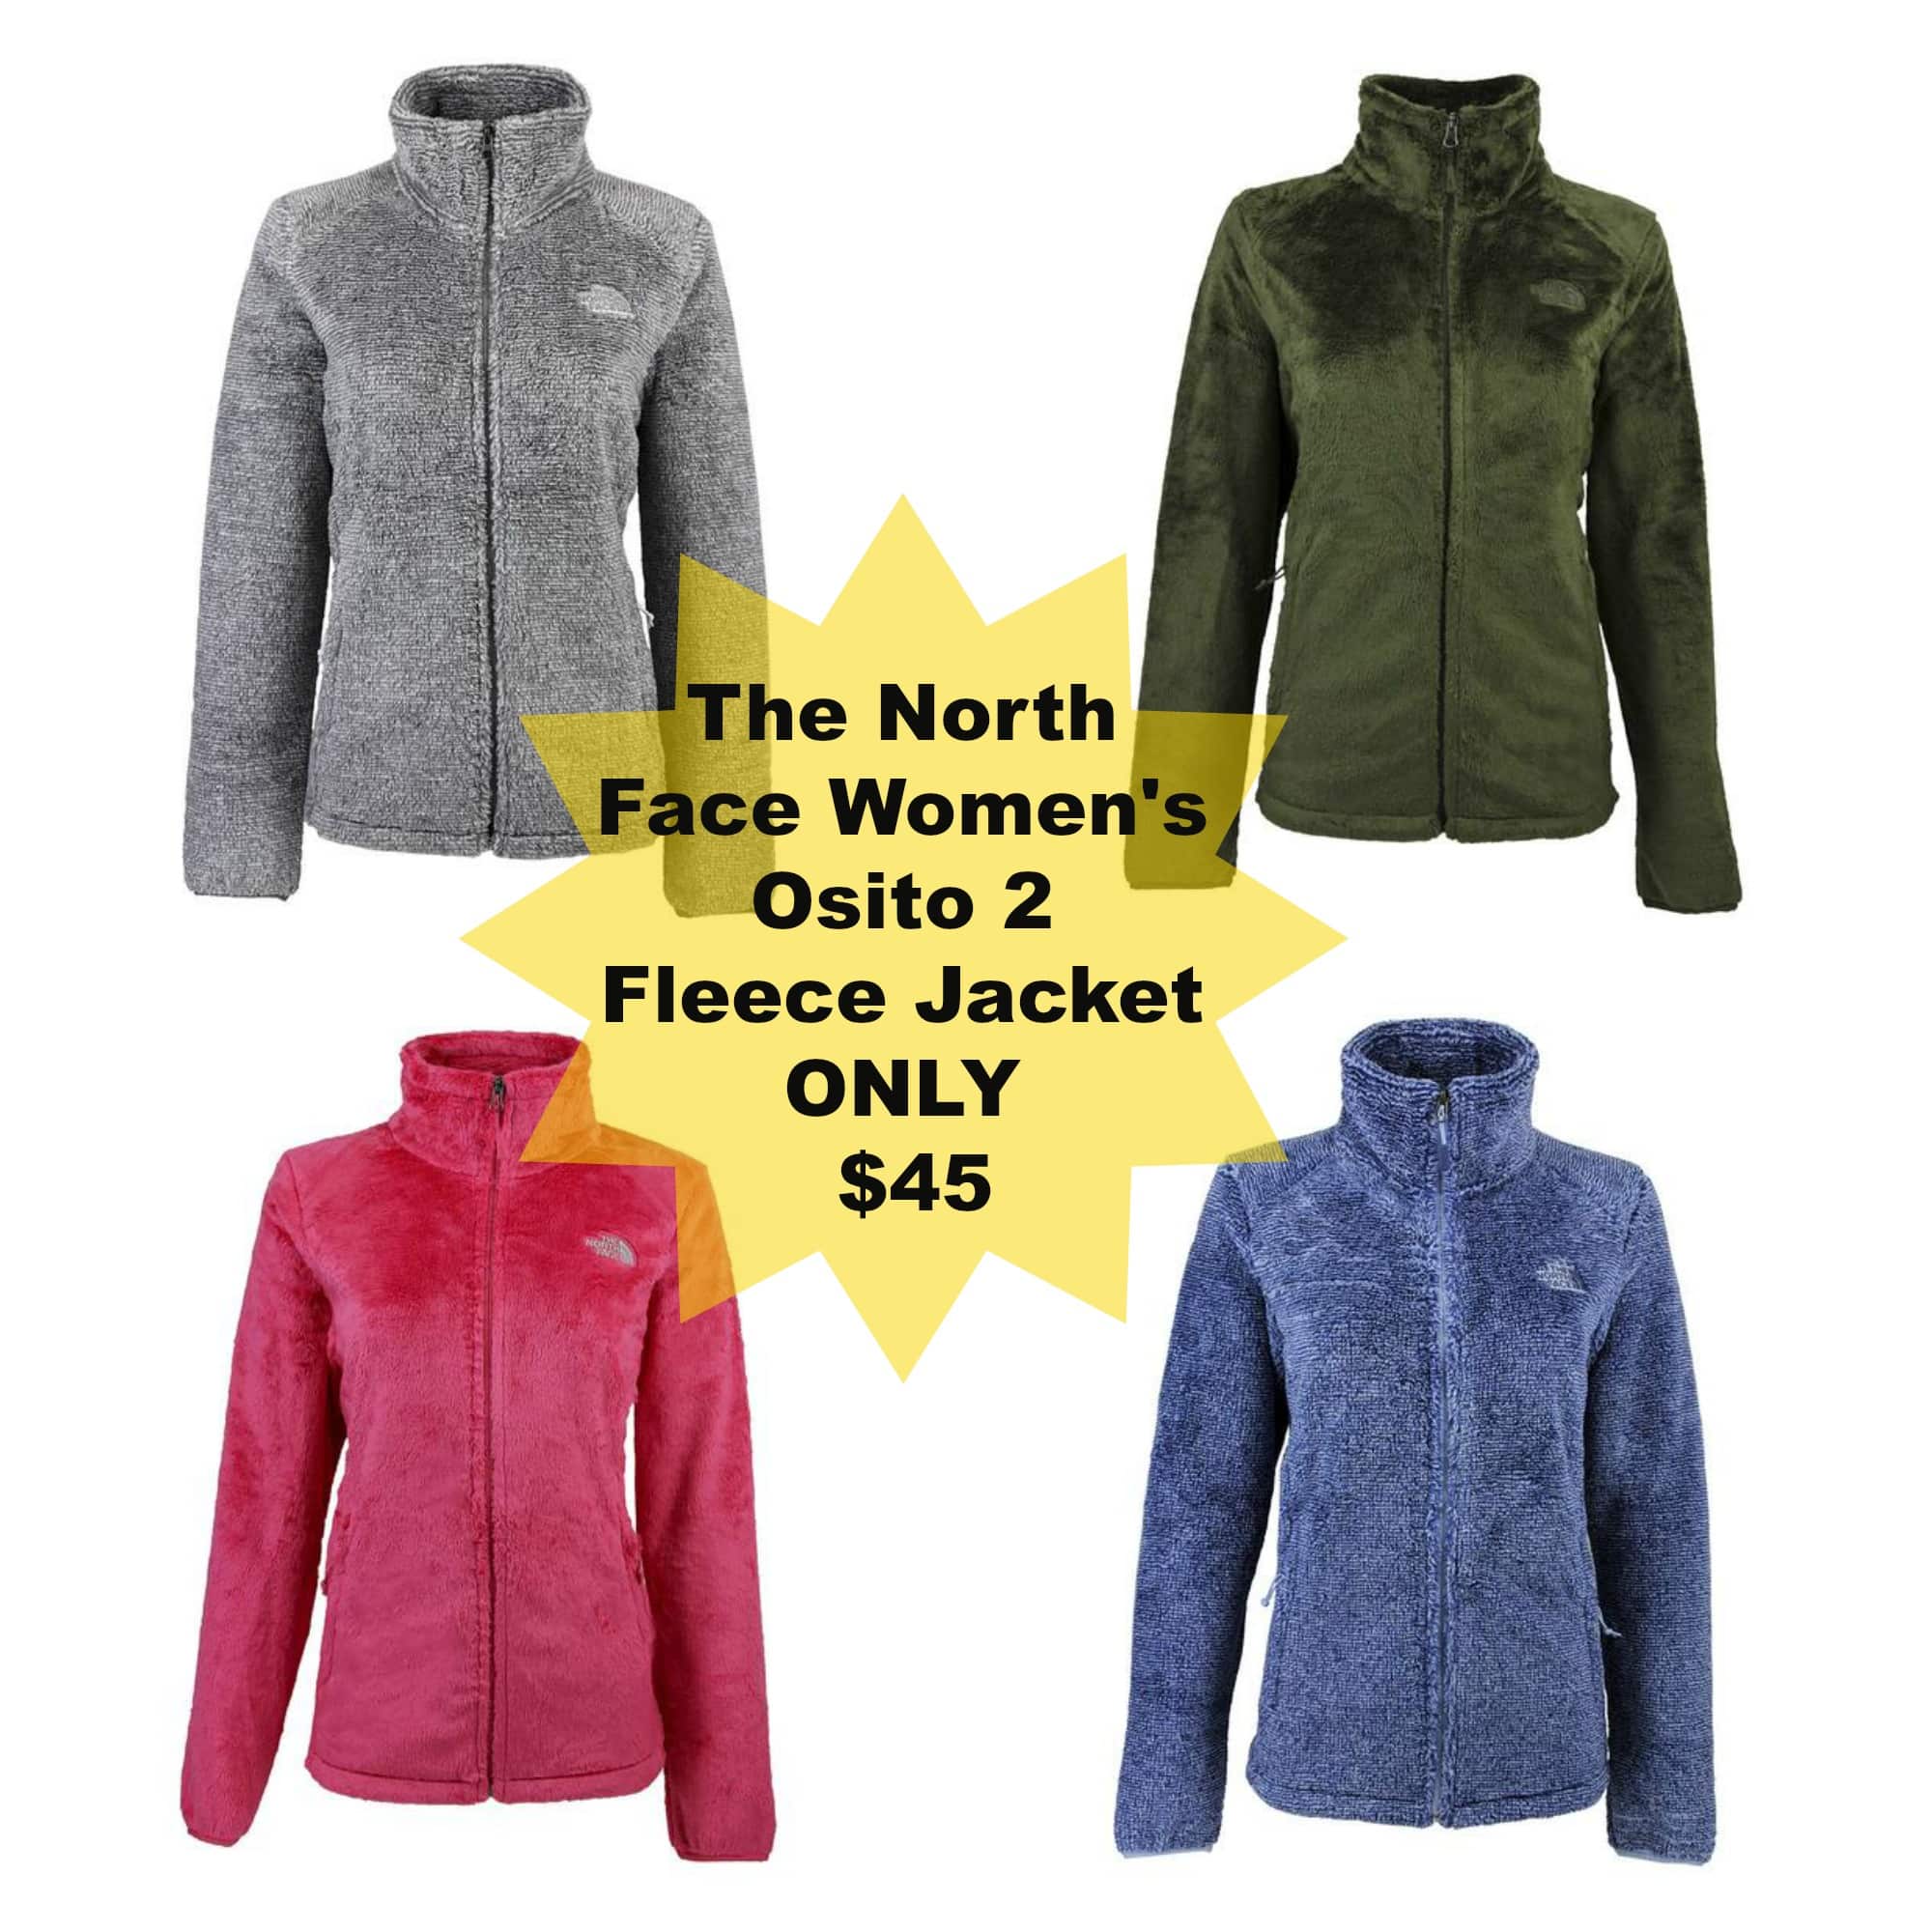 *HOT* The North Face Women's Osito 2 Fleece Jacket for only $45 (regular $99)!